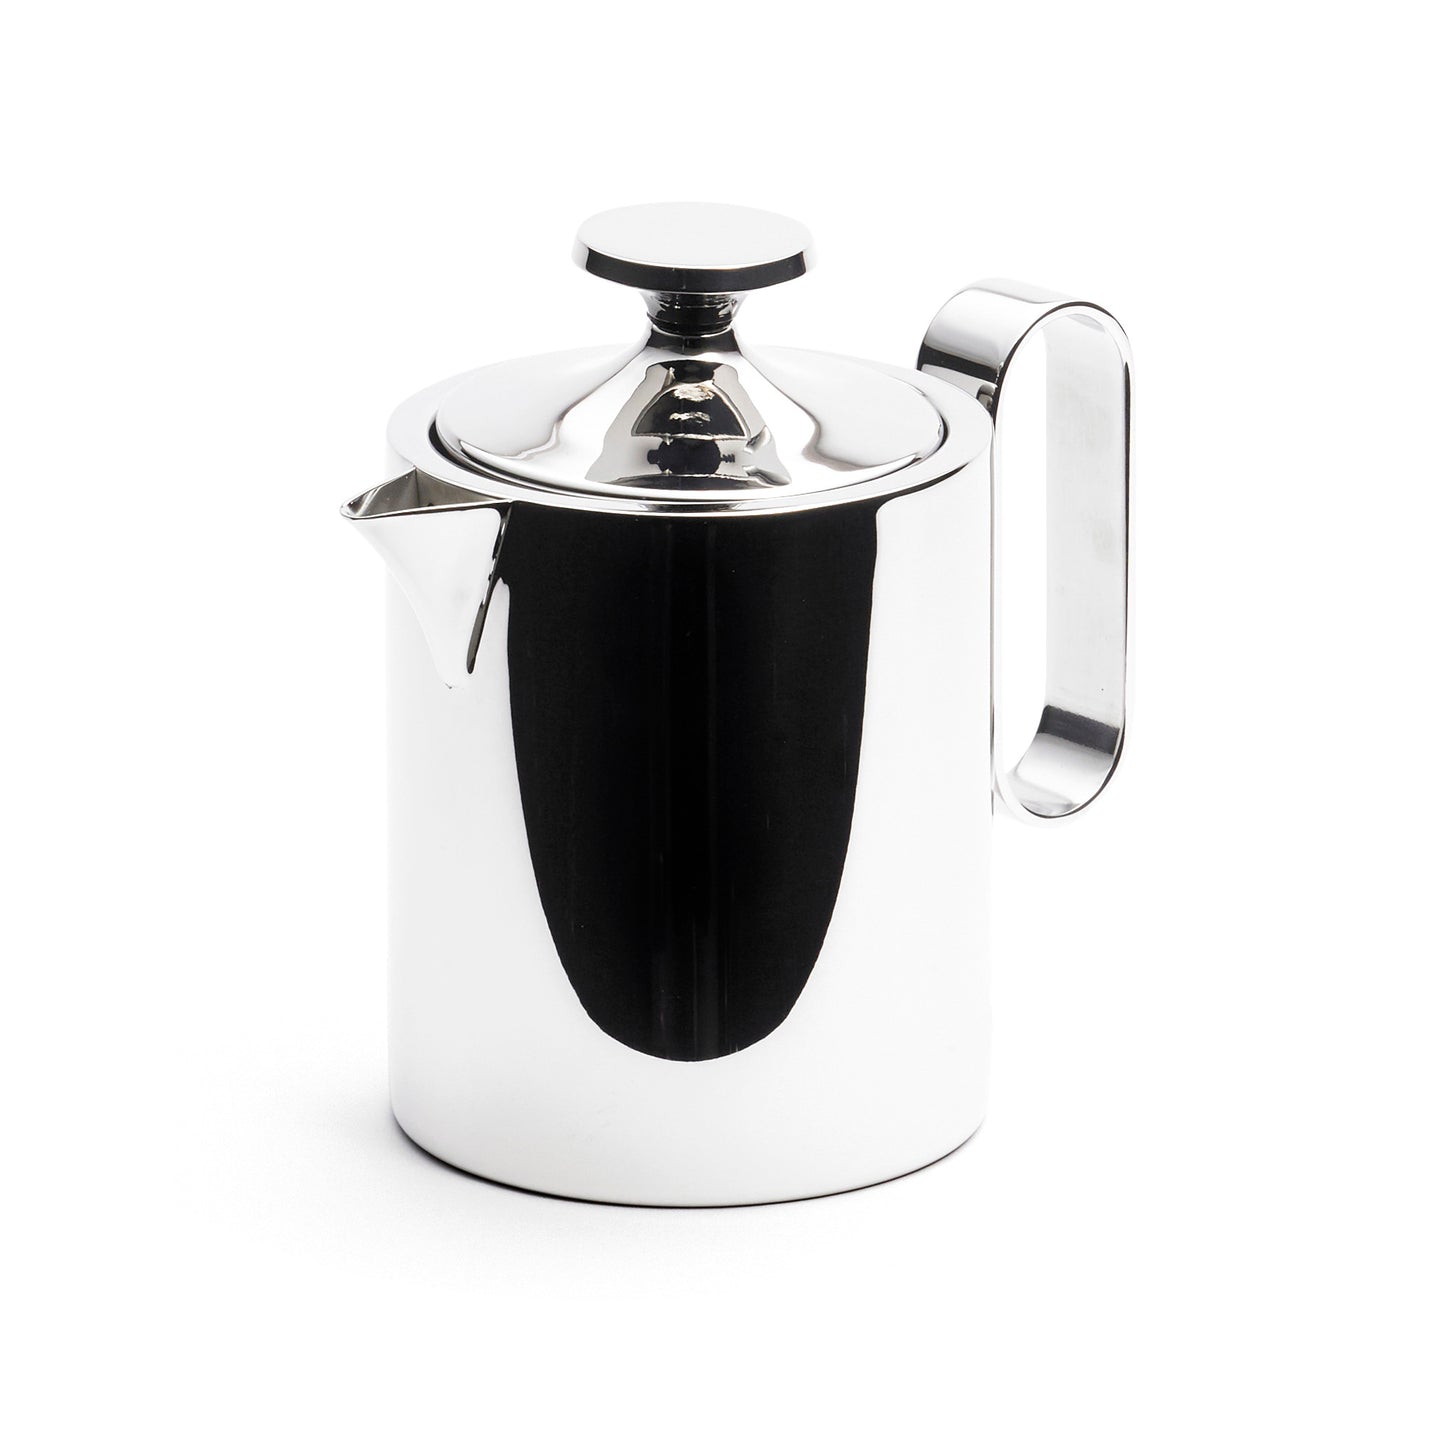 David Mellor: Stainless Steel Teapot with Stainless Handle